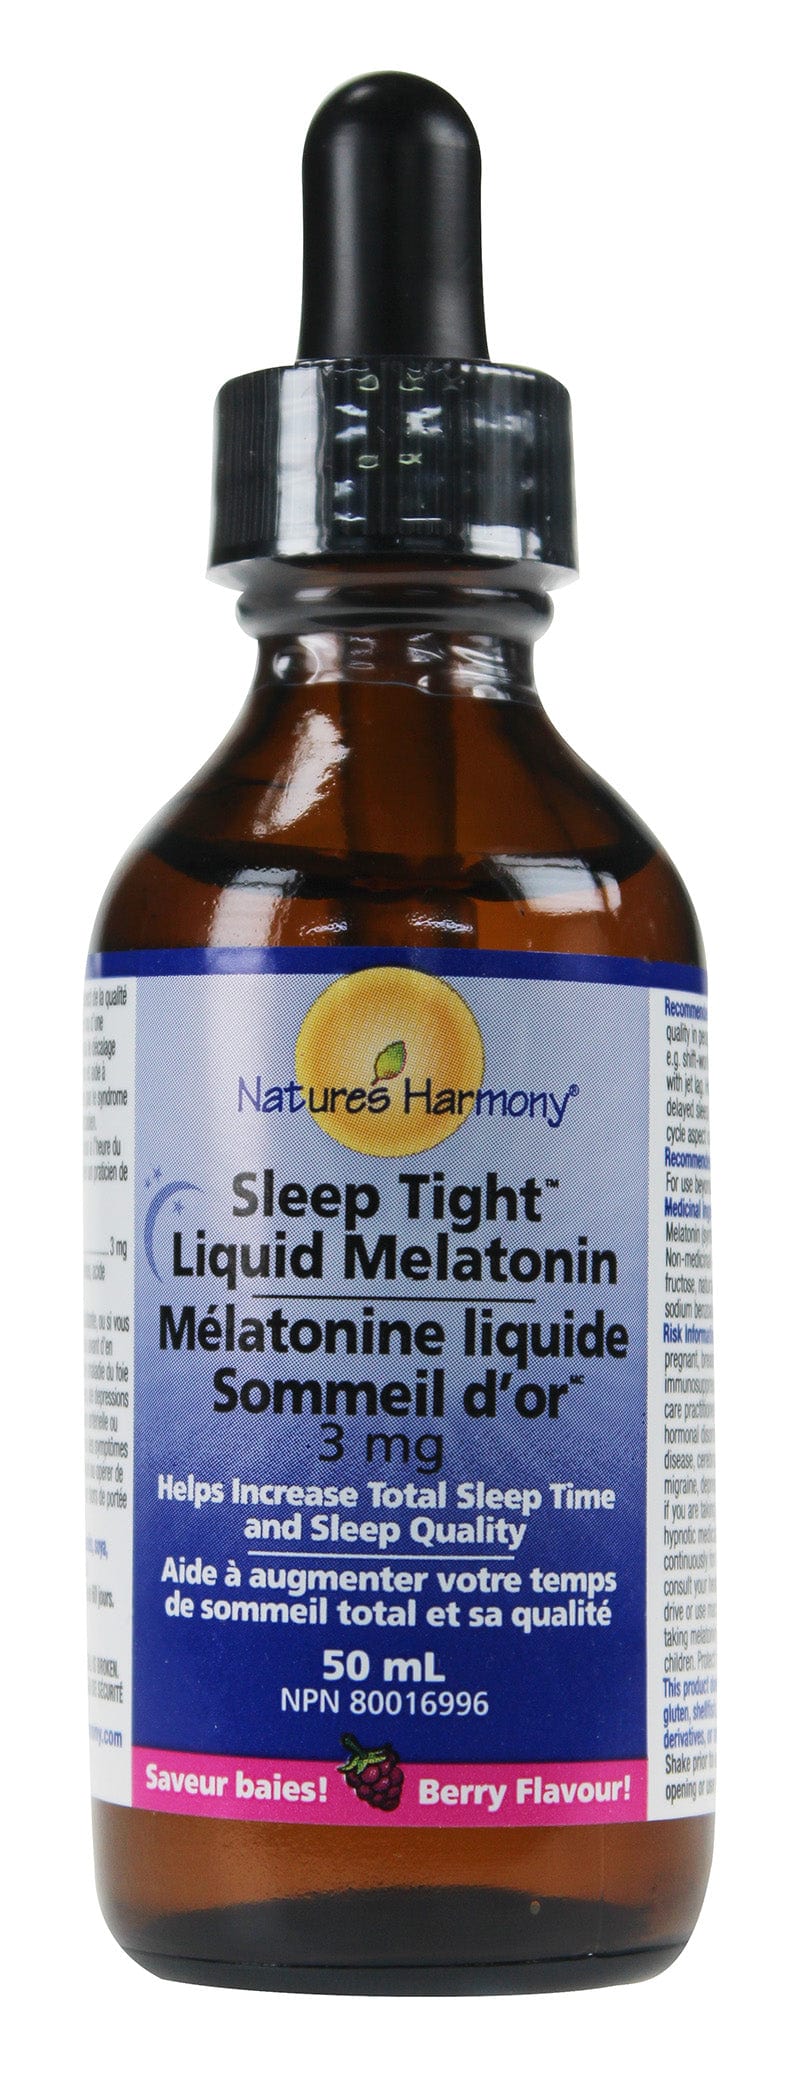 NATURE'S HARMONY Suppléments Sommeil d'or (mélatonine liquide 3mg) 50ml